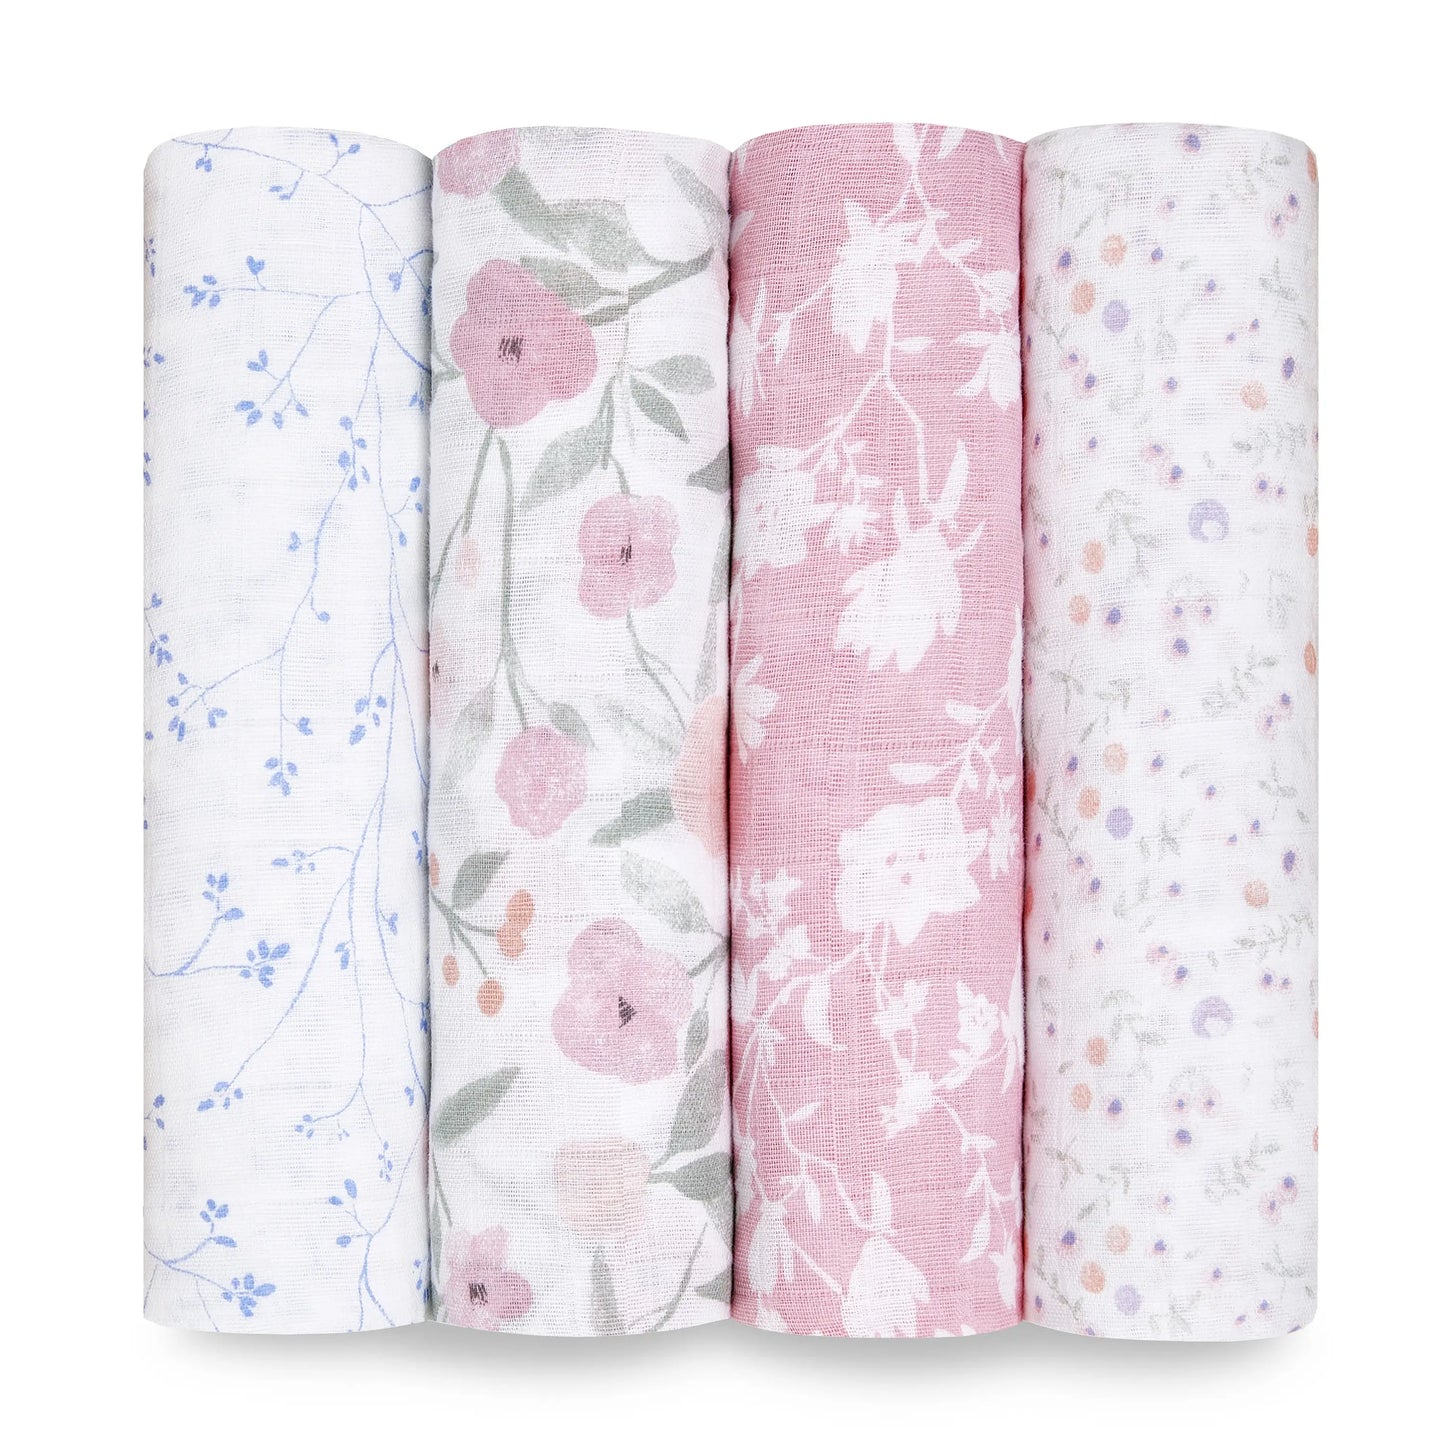 Aden + Anais Classic Muslin Swaddle Blankets 4 Pack